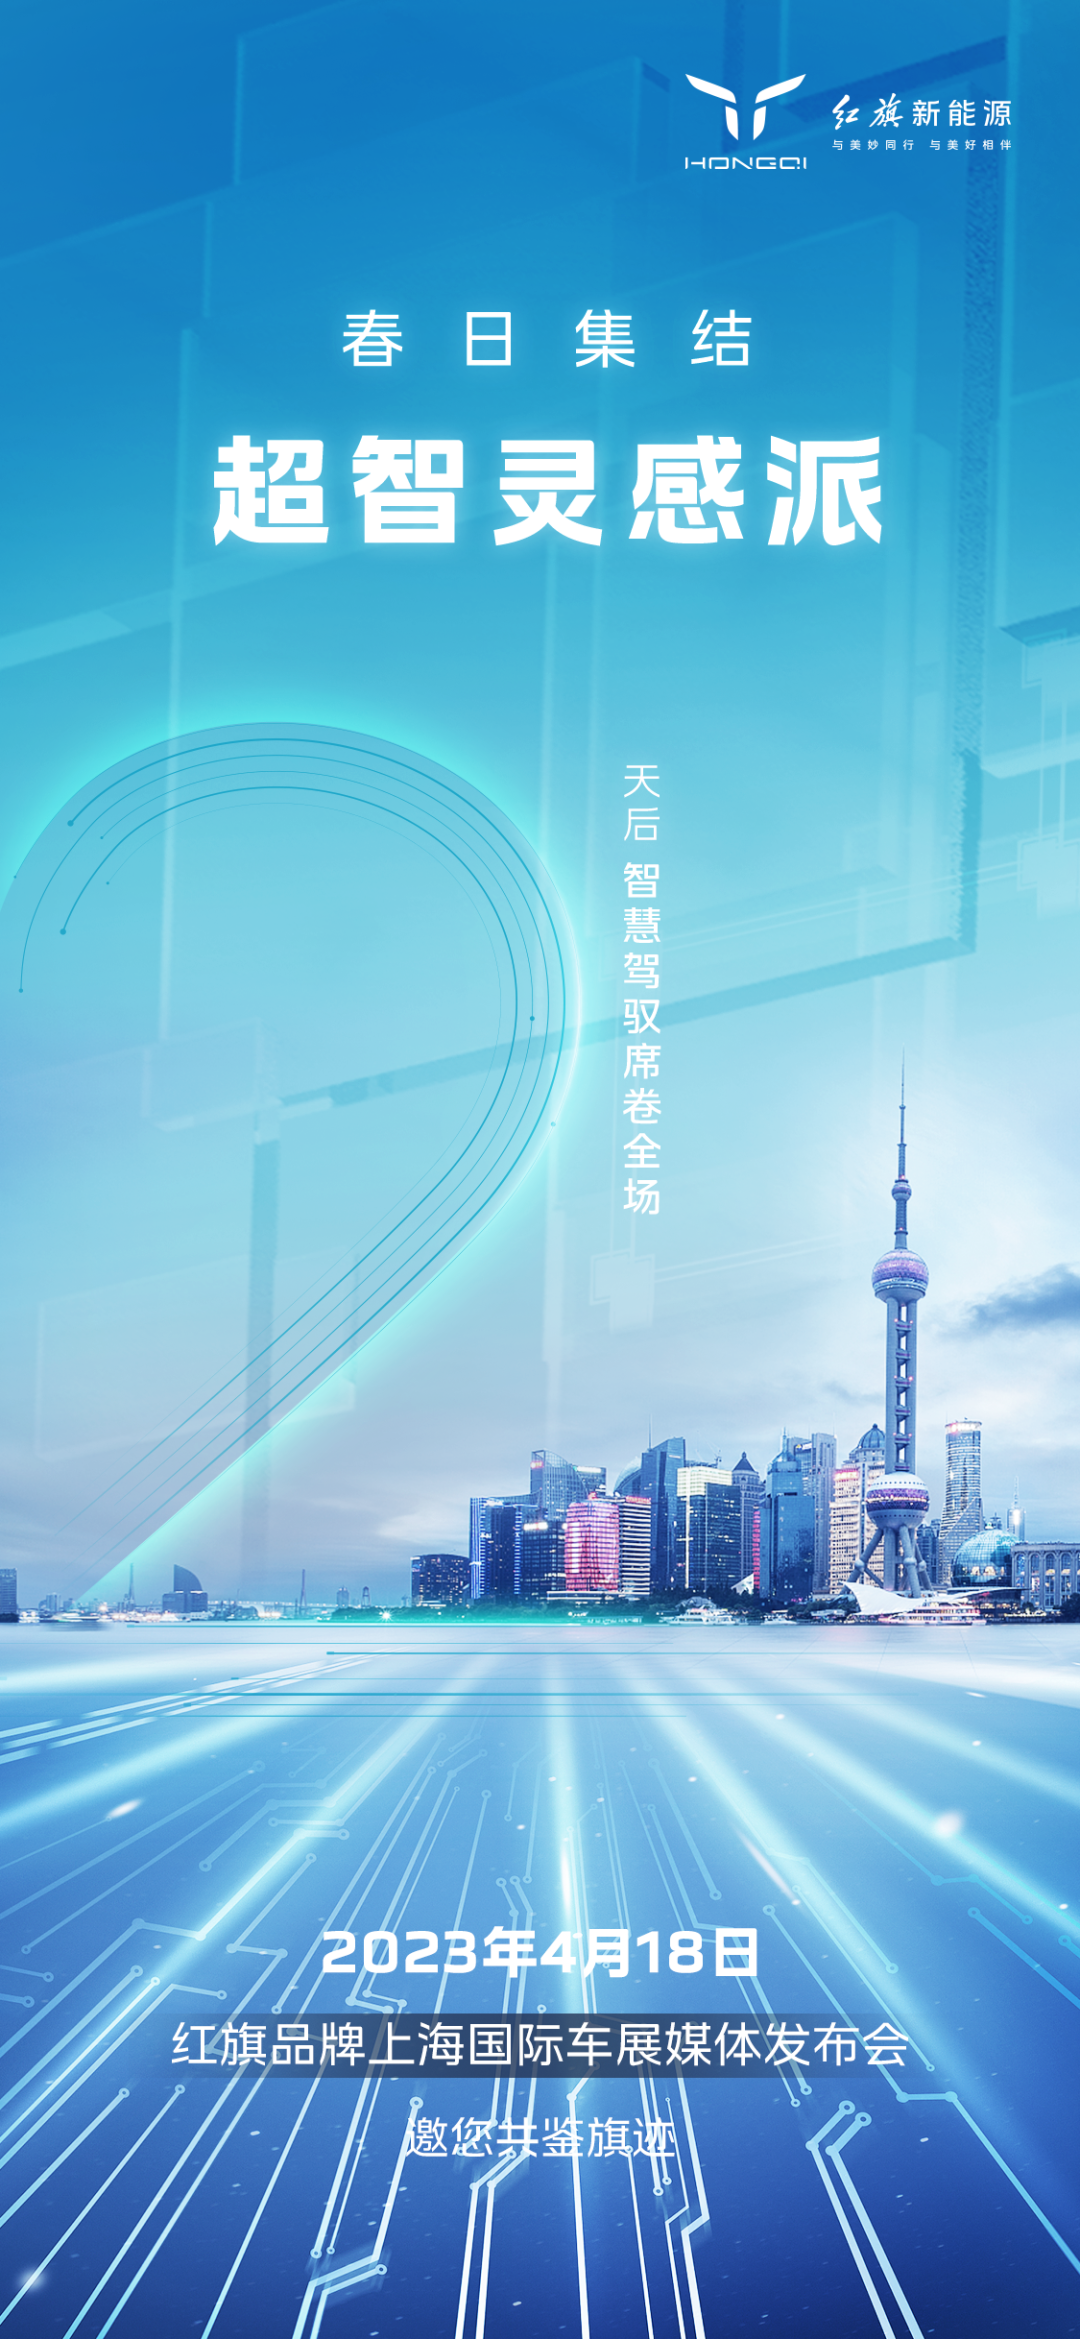 Red Flag to Unveil New L5 Model and Cutting-Edge EV Technology at Shanghai Auto Show 2021